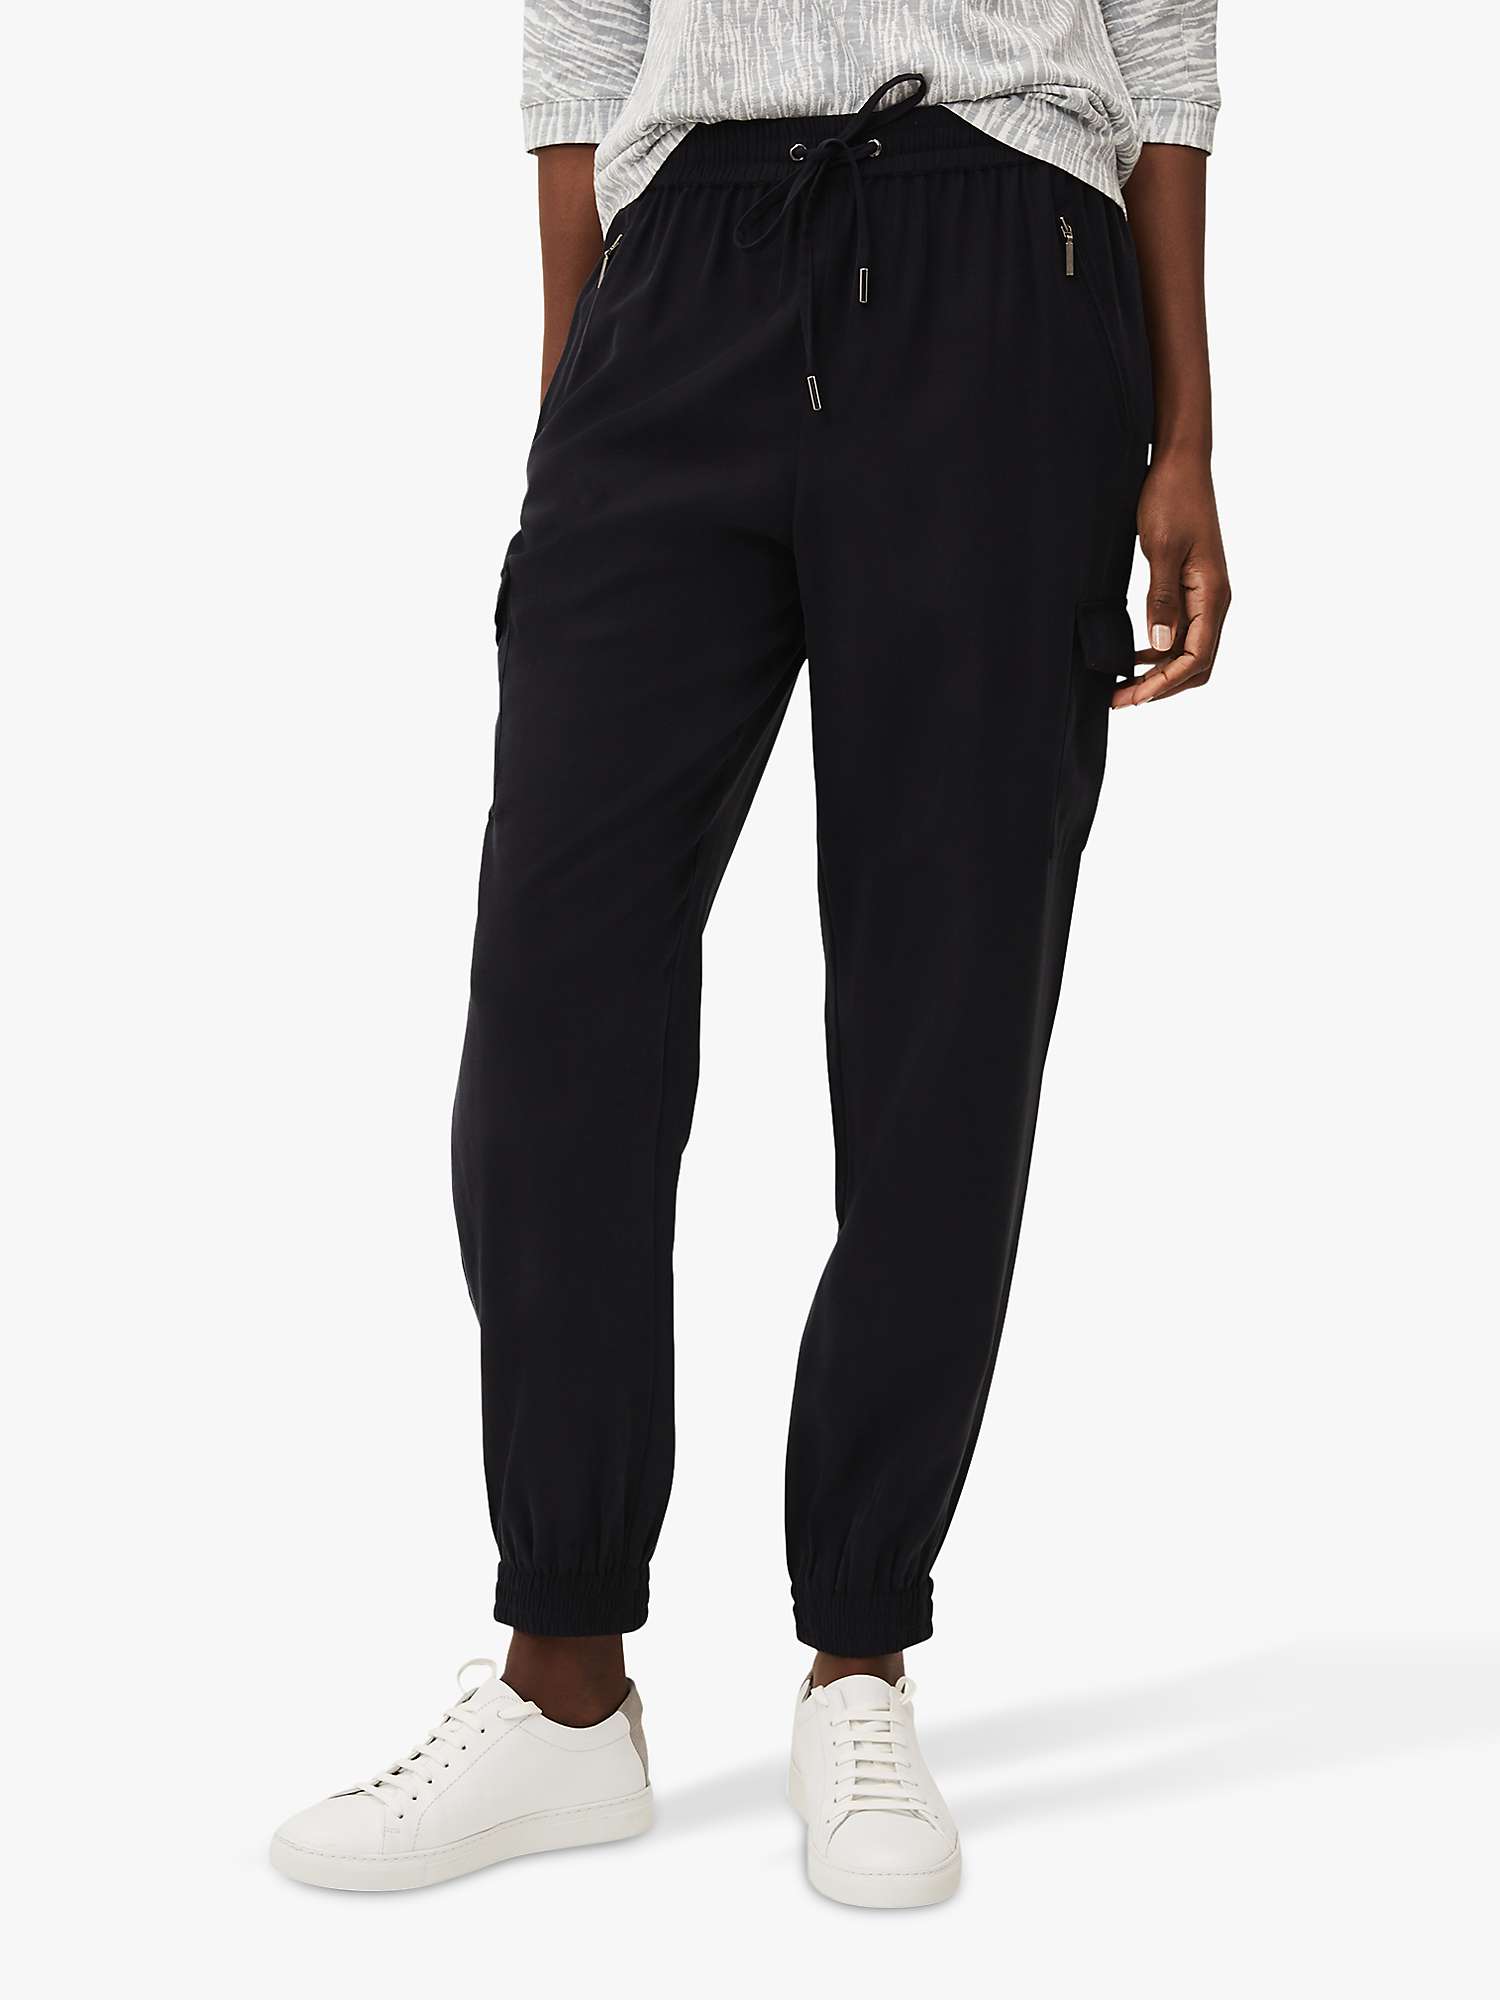 Buy Phase Eight Alora Soft Jogger Online at johnlewis.com